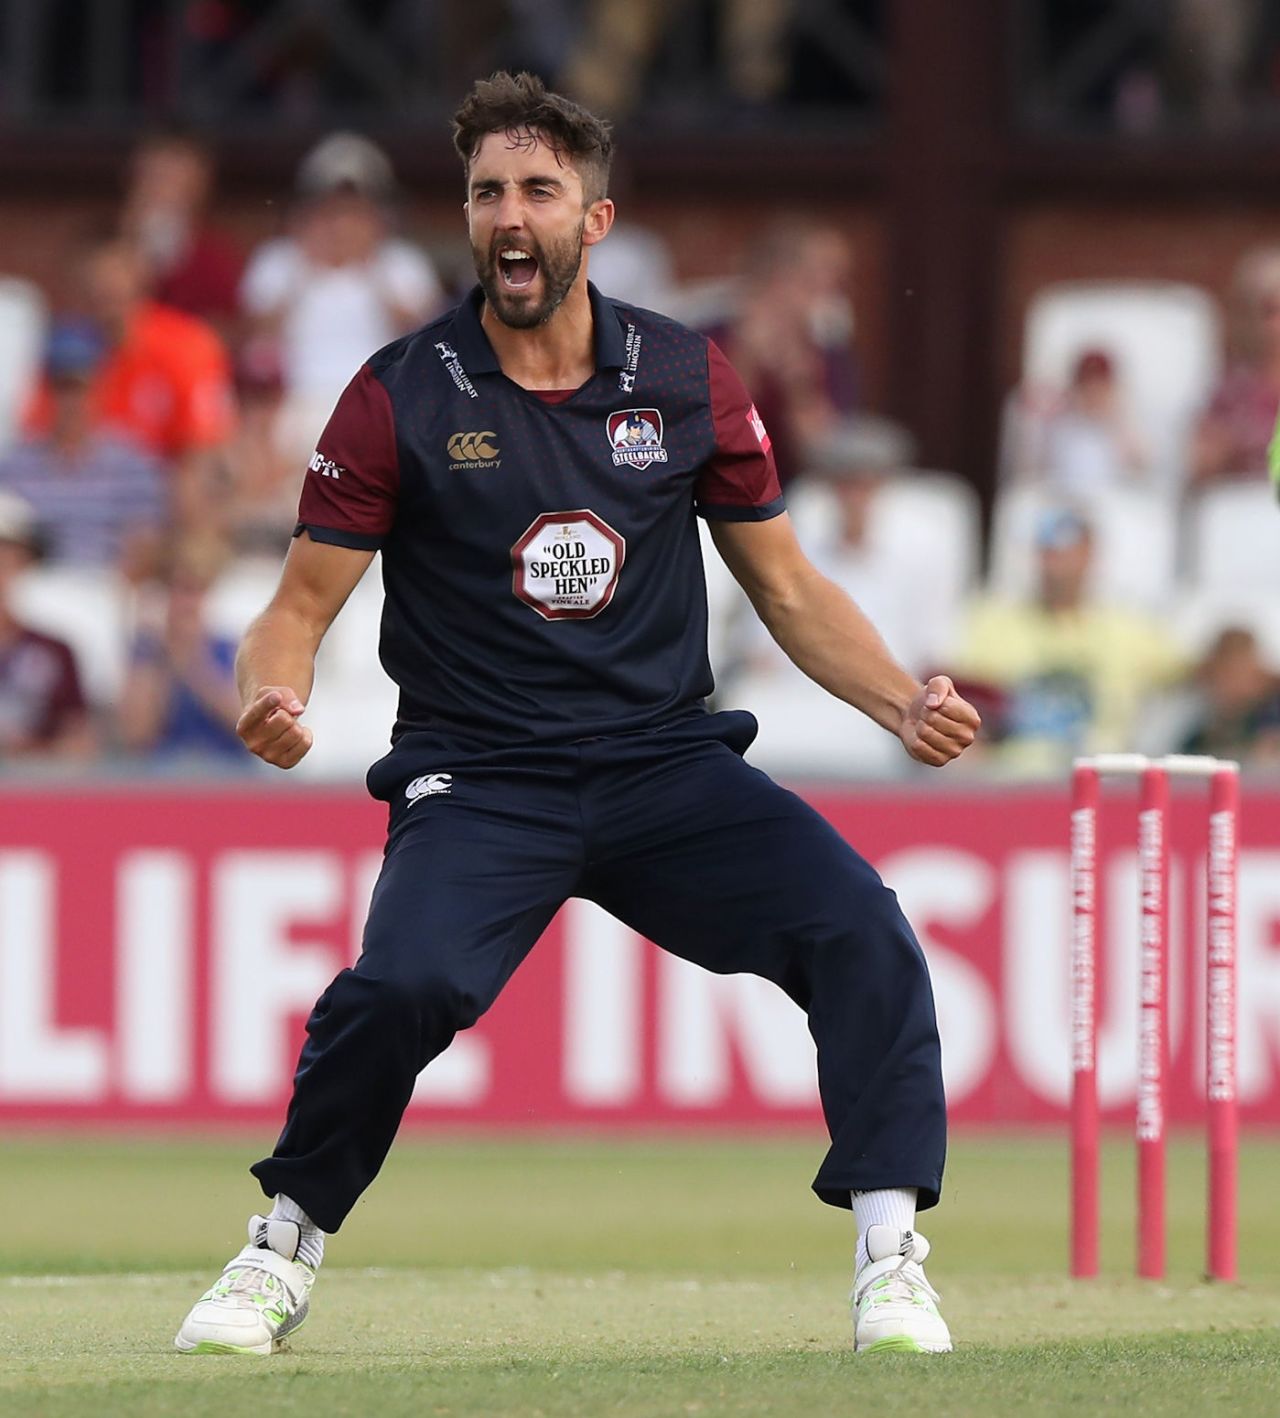 Ben Sanderson of Northamptonshire celebrates after bowling Riki Wessels during the Vitality Blast match between Northamptonshire Steelbacks and Nottinghamshire Outlaws at The County Ground on July 6, 2018